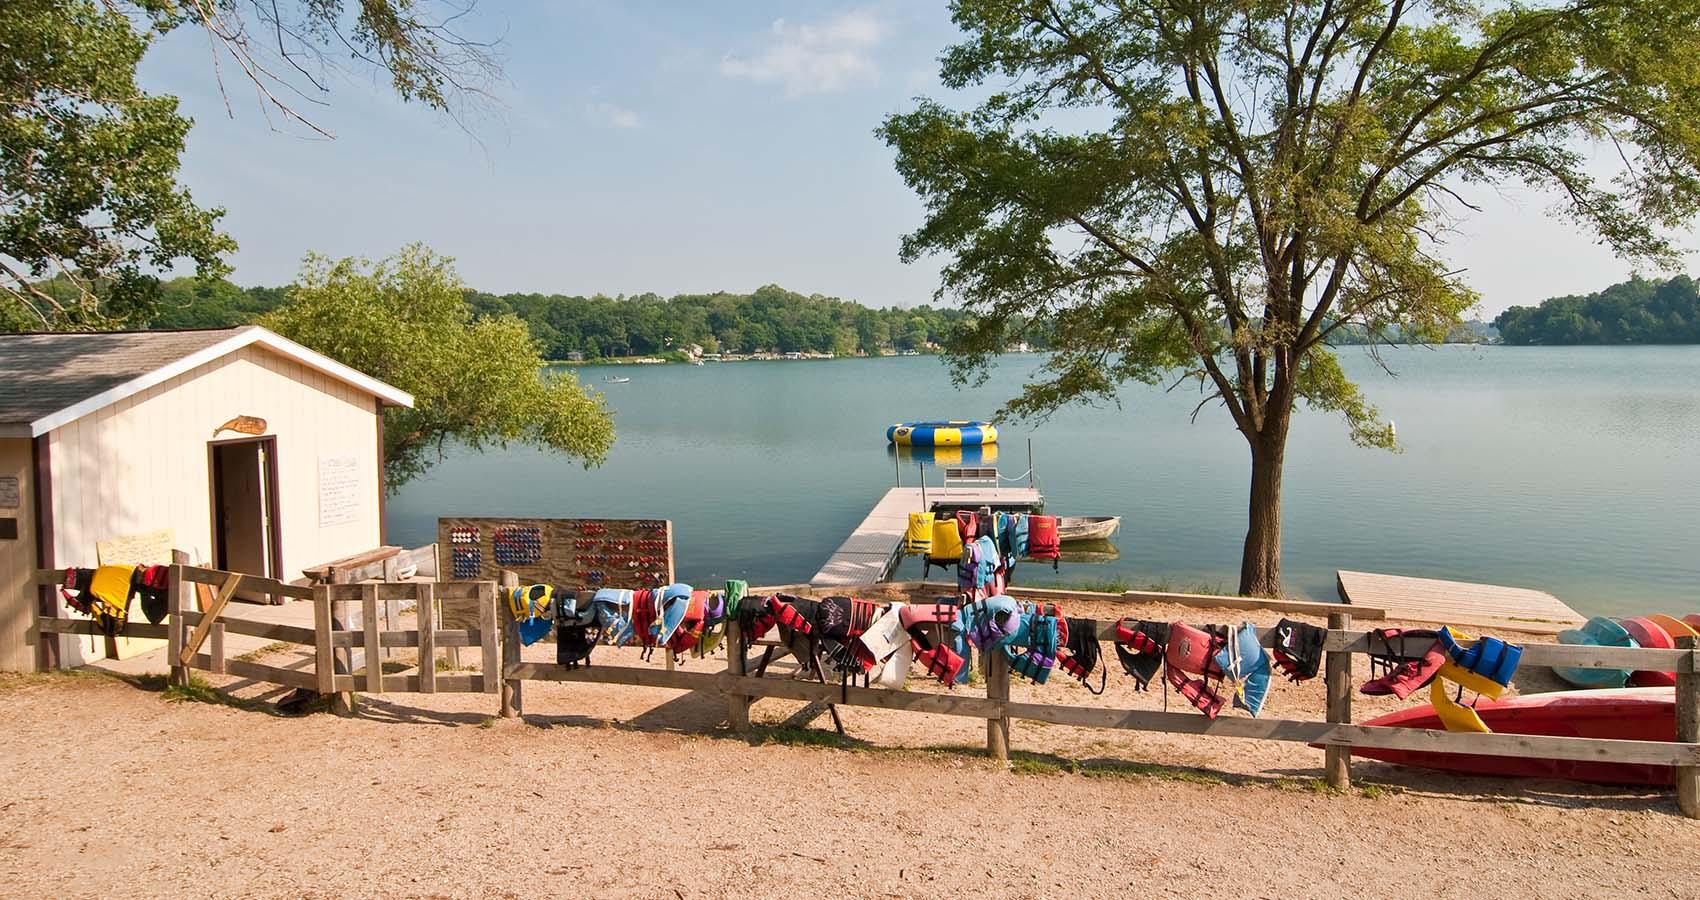 stock photo of lifejackets hanging on fence by lake